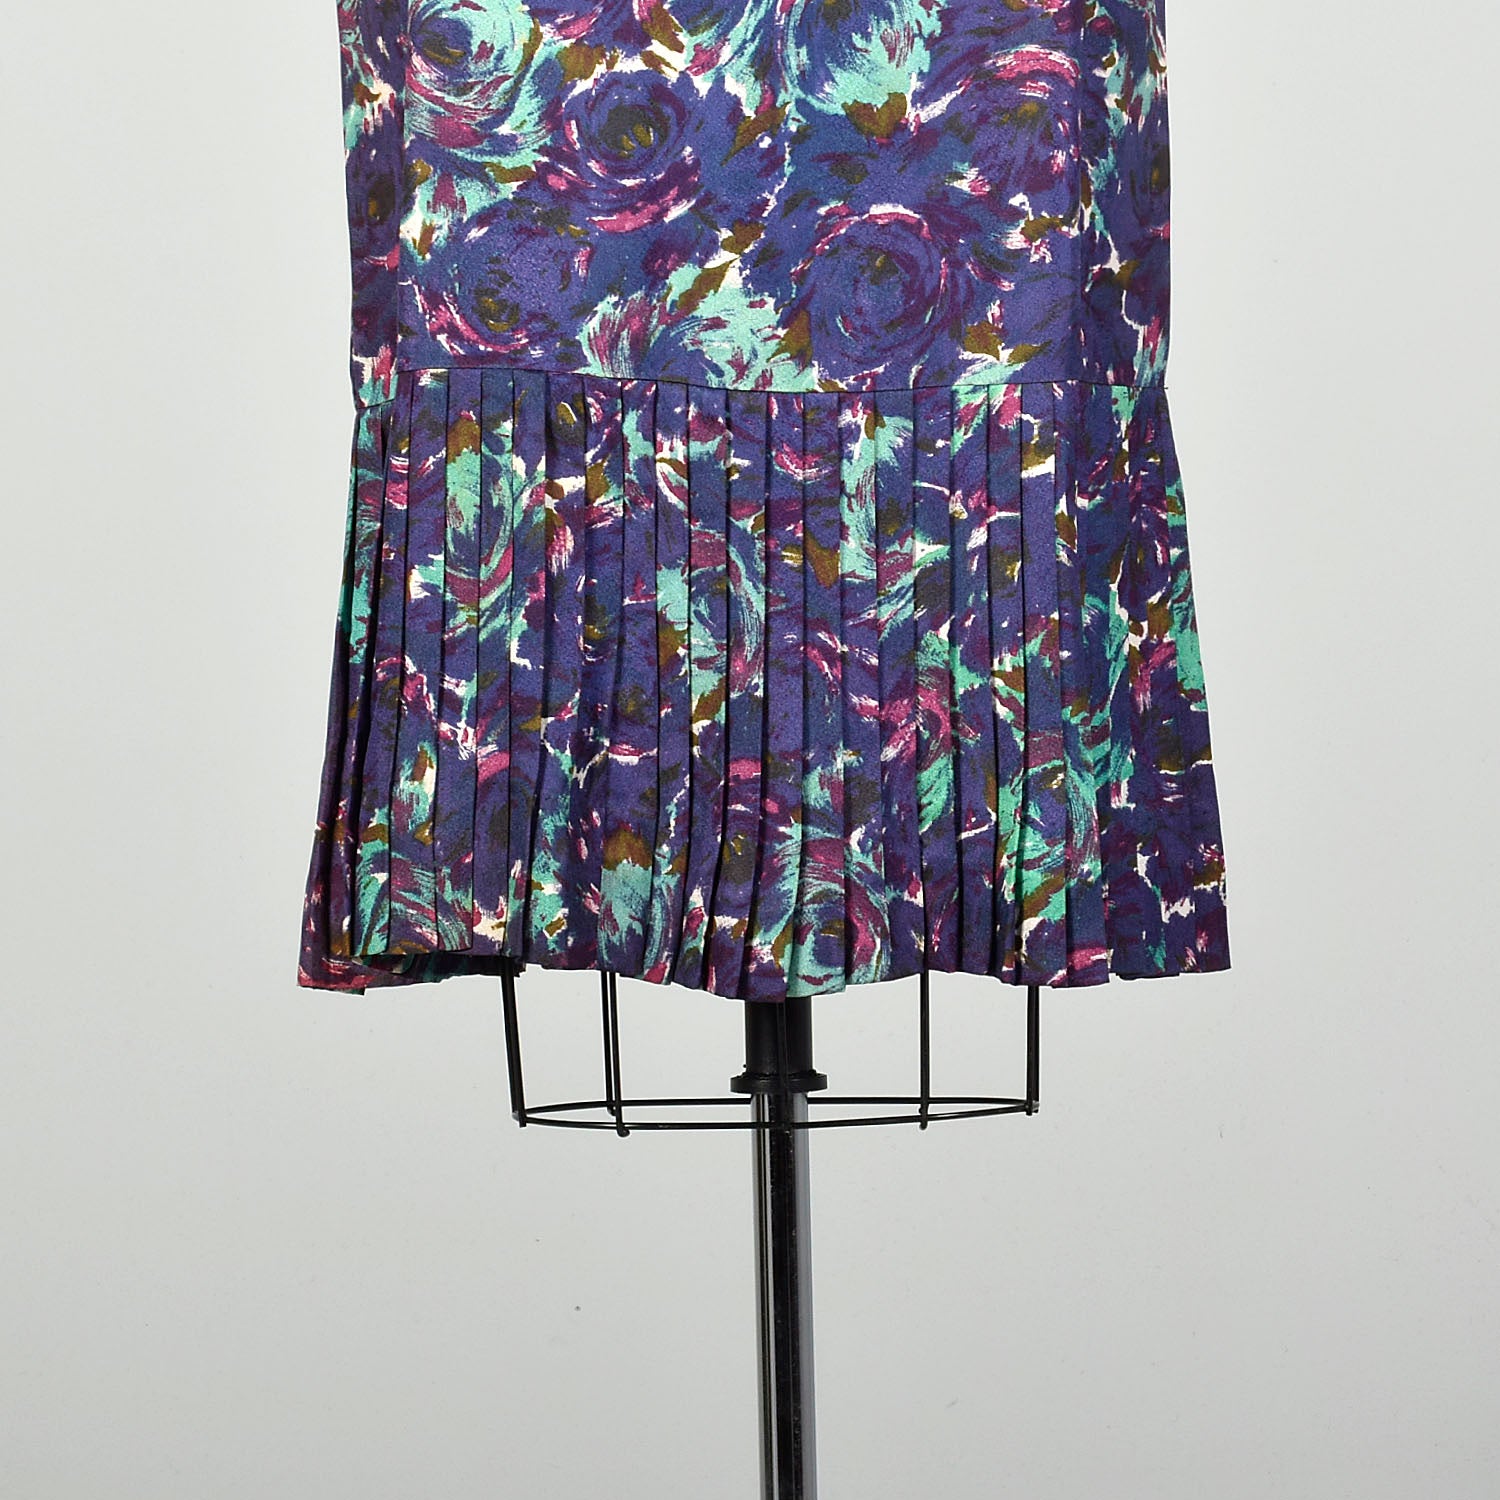 Large 1950s Blue and Purple Swirl Patterned Acetate Dress